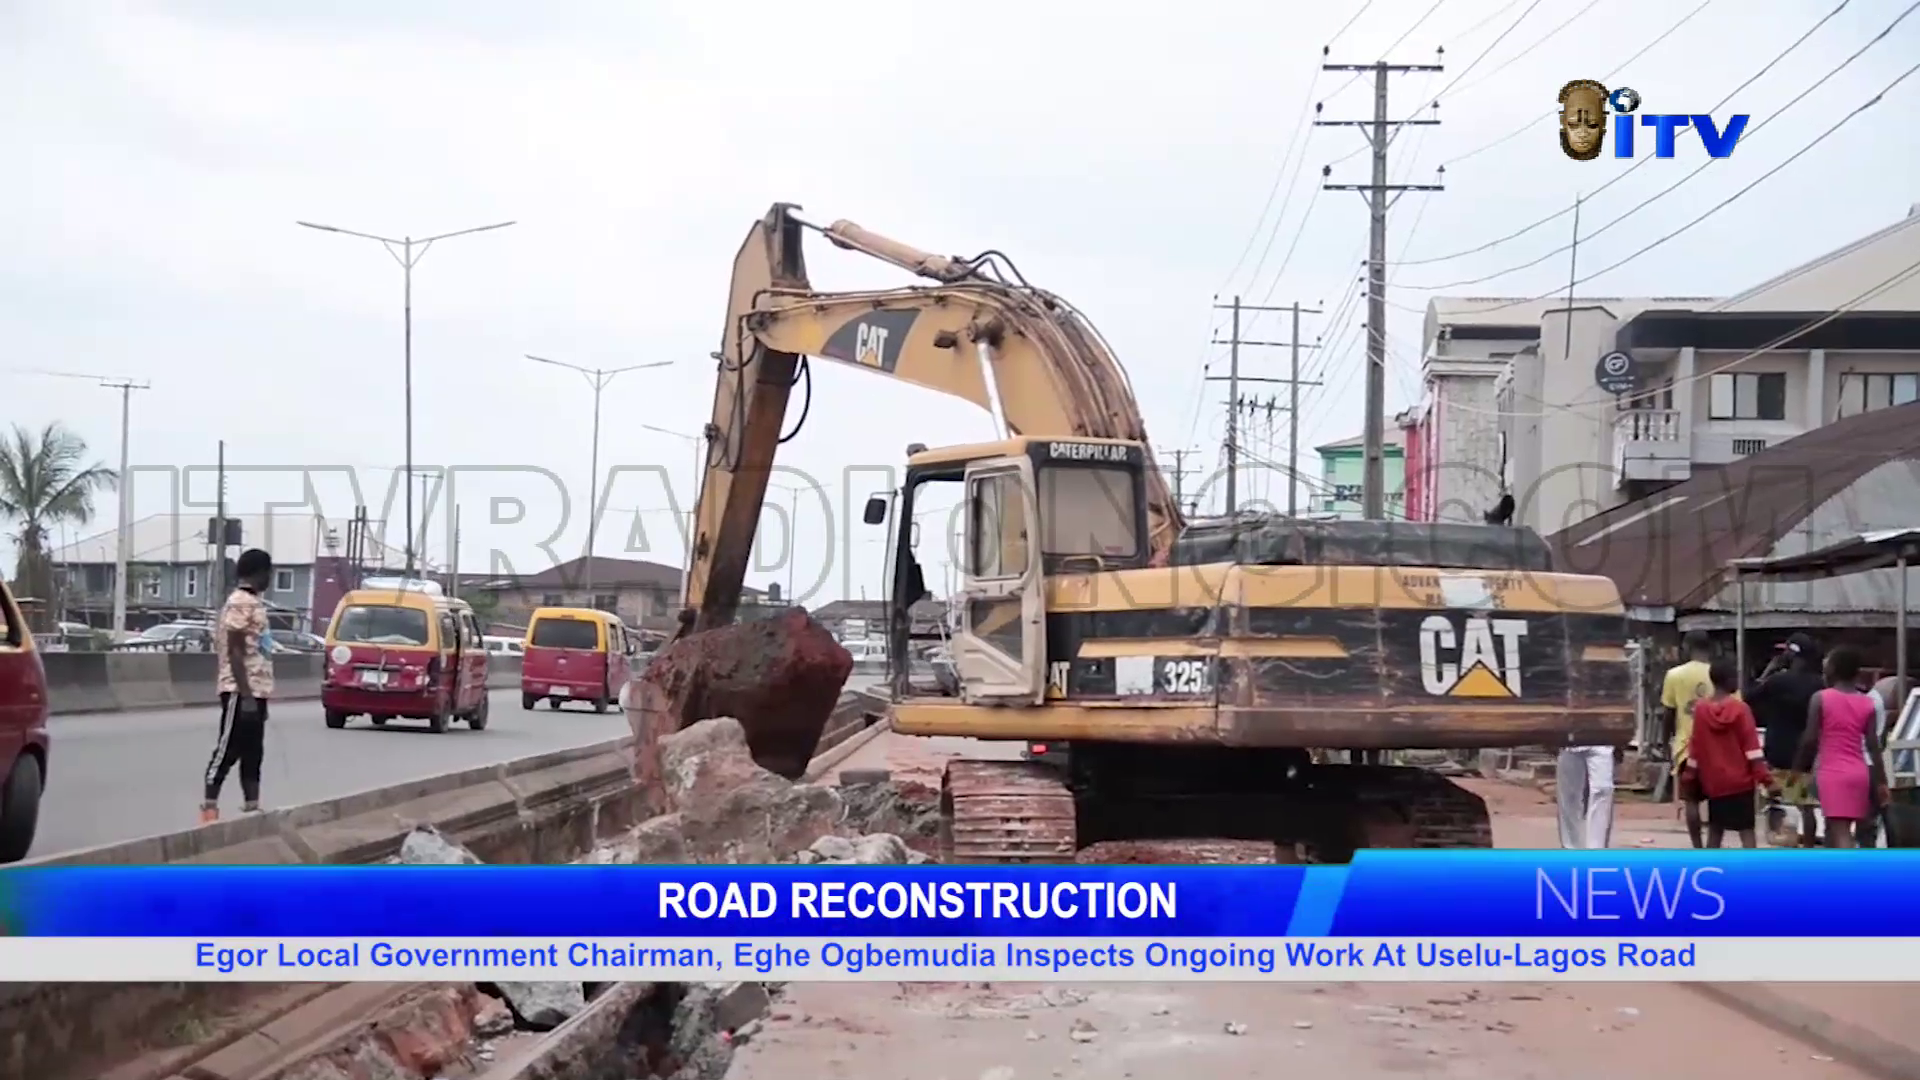 Egor Local Government Chairman, Eghe Ogbemudia Inspects Ongoing Work At Uselu-Lagos Road